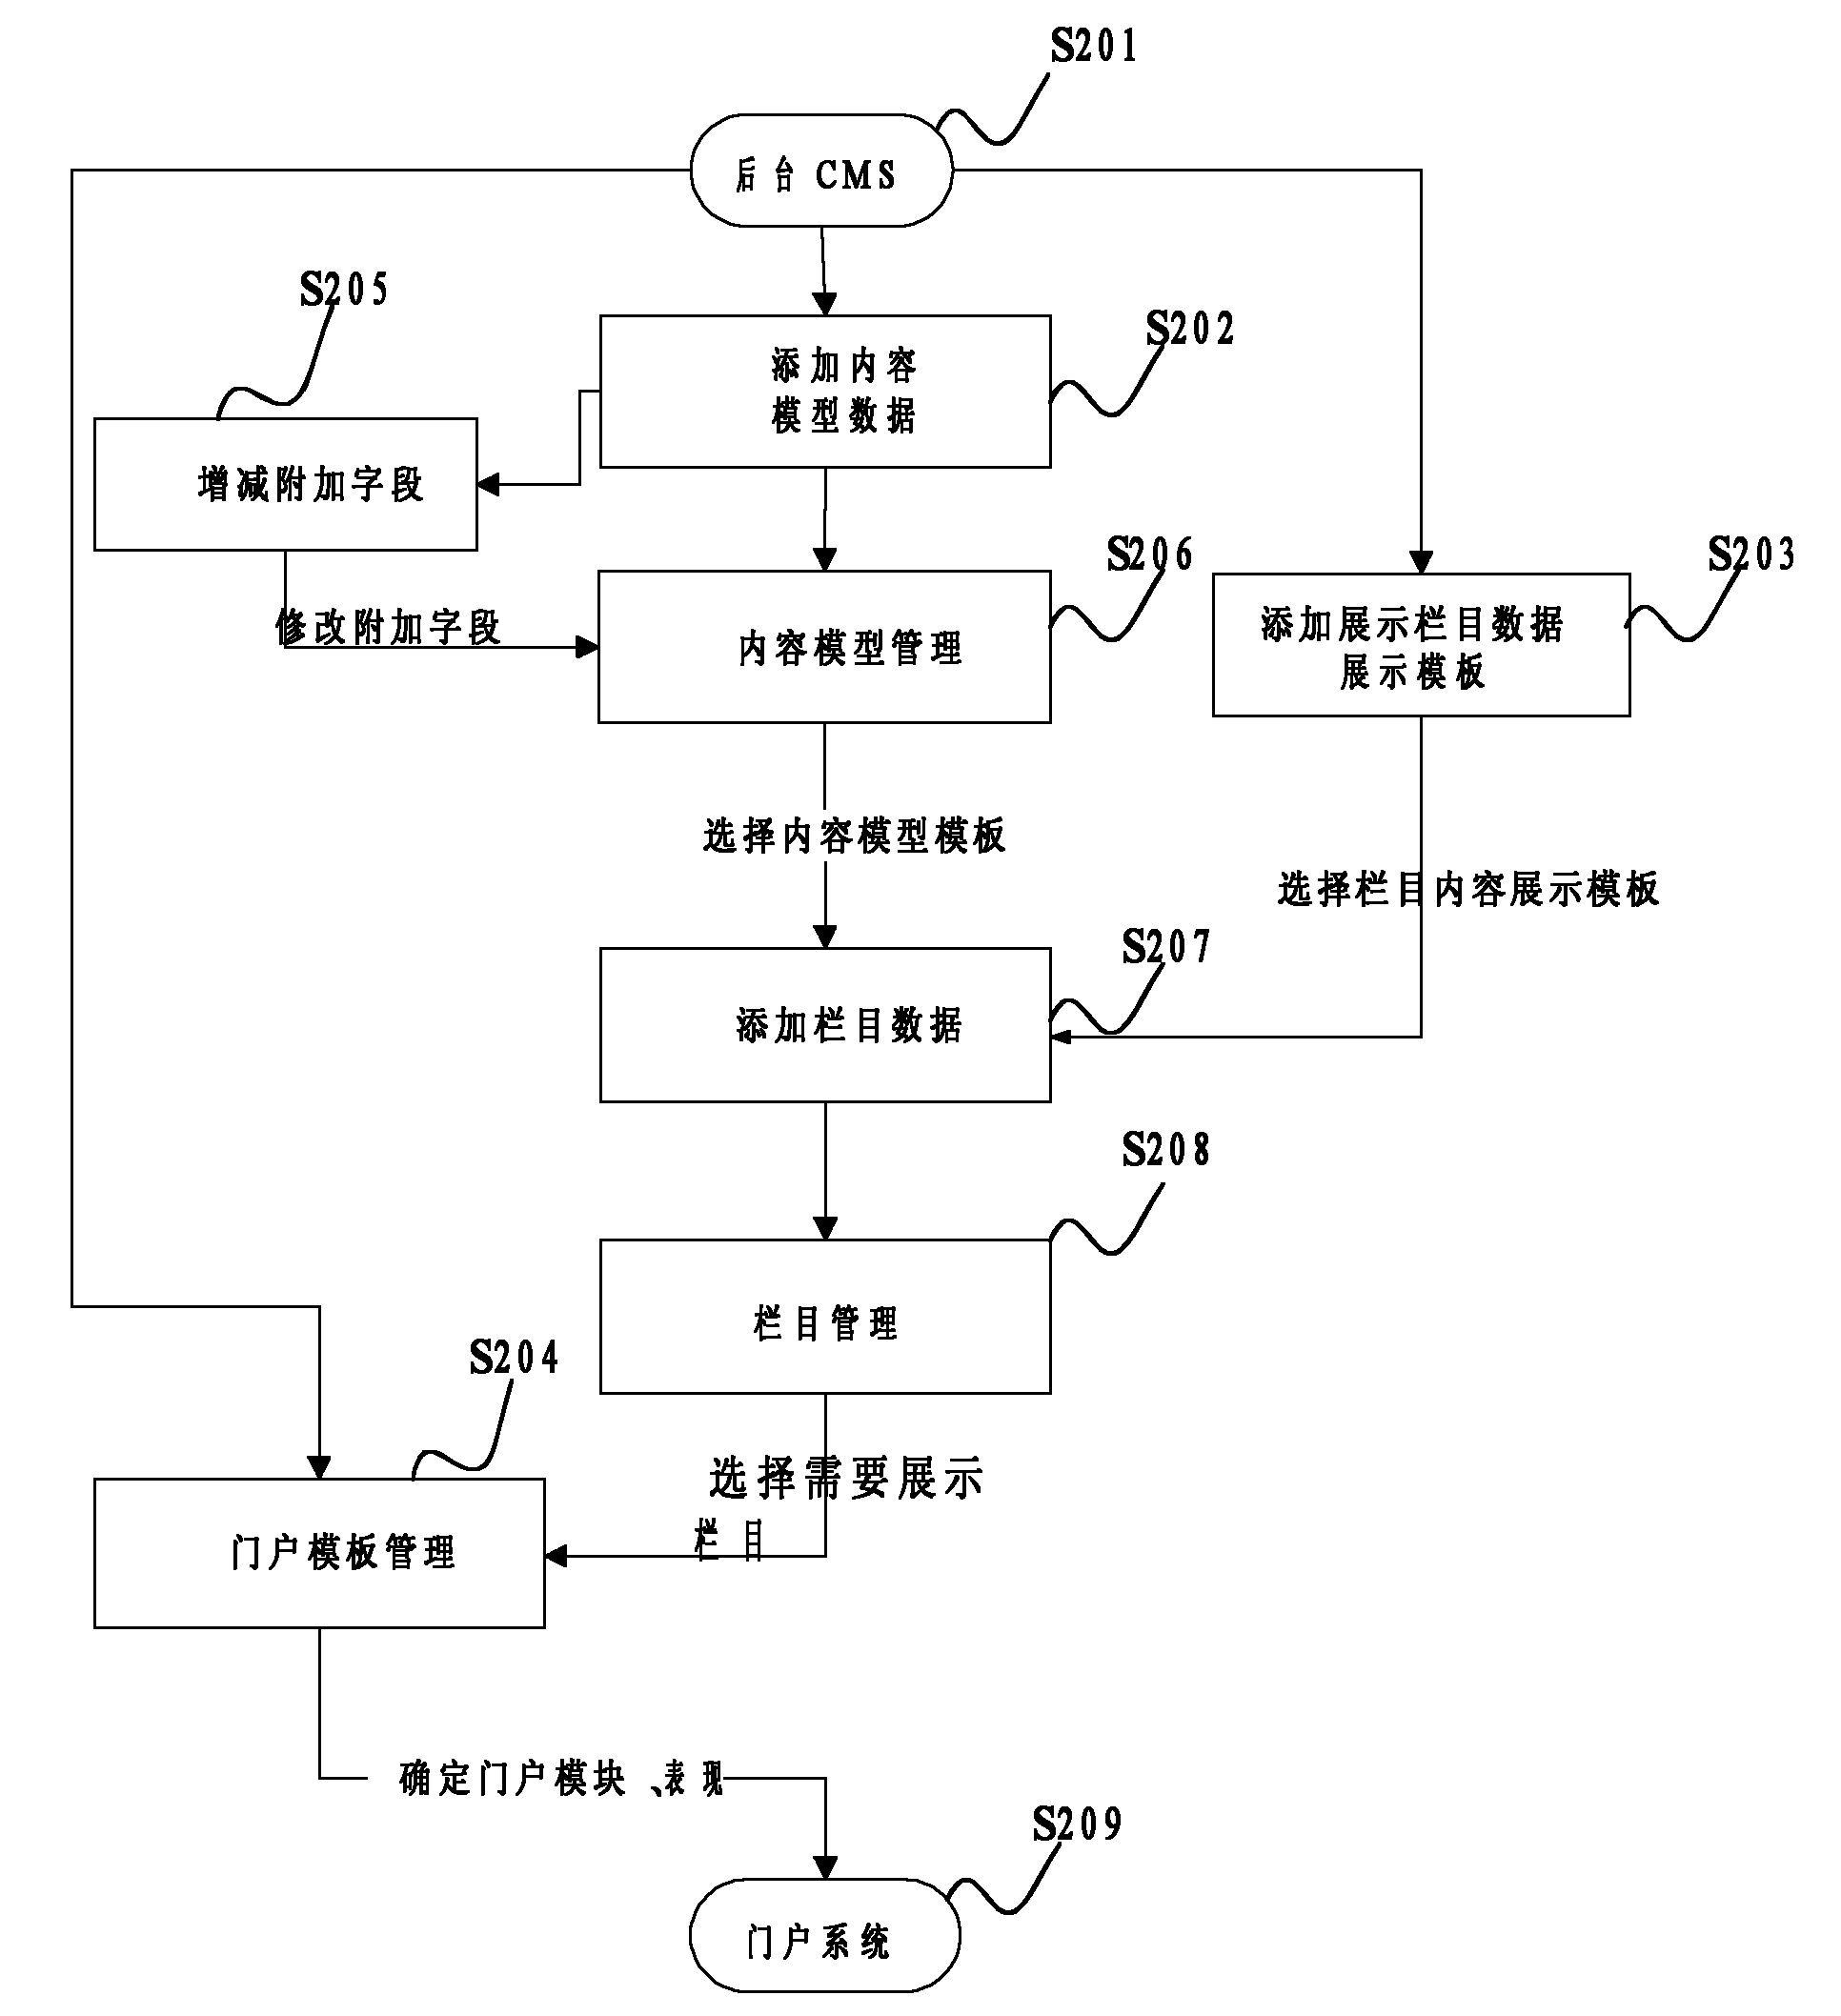 Dynamic template-based display method and system